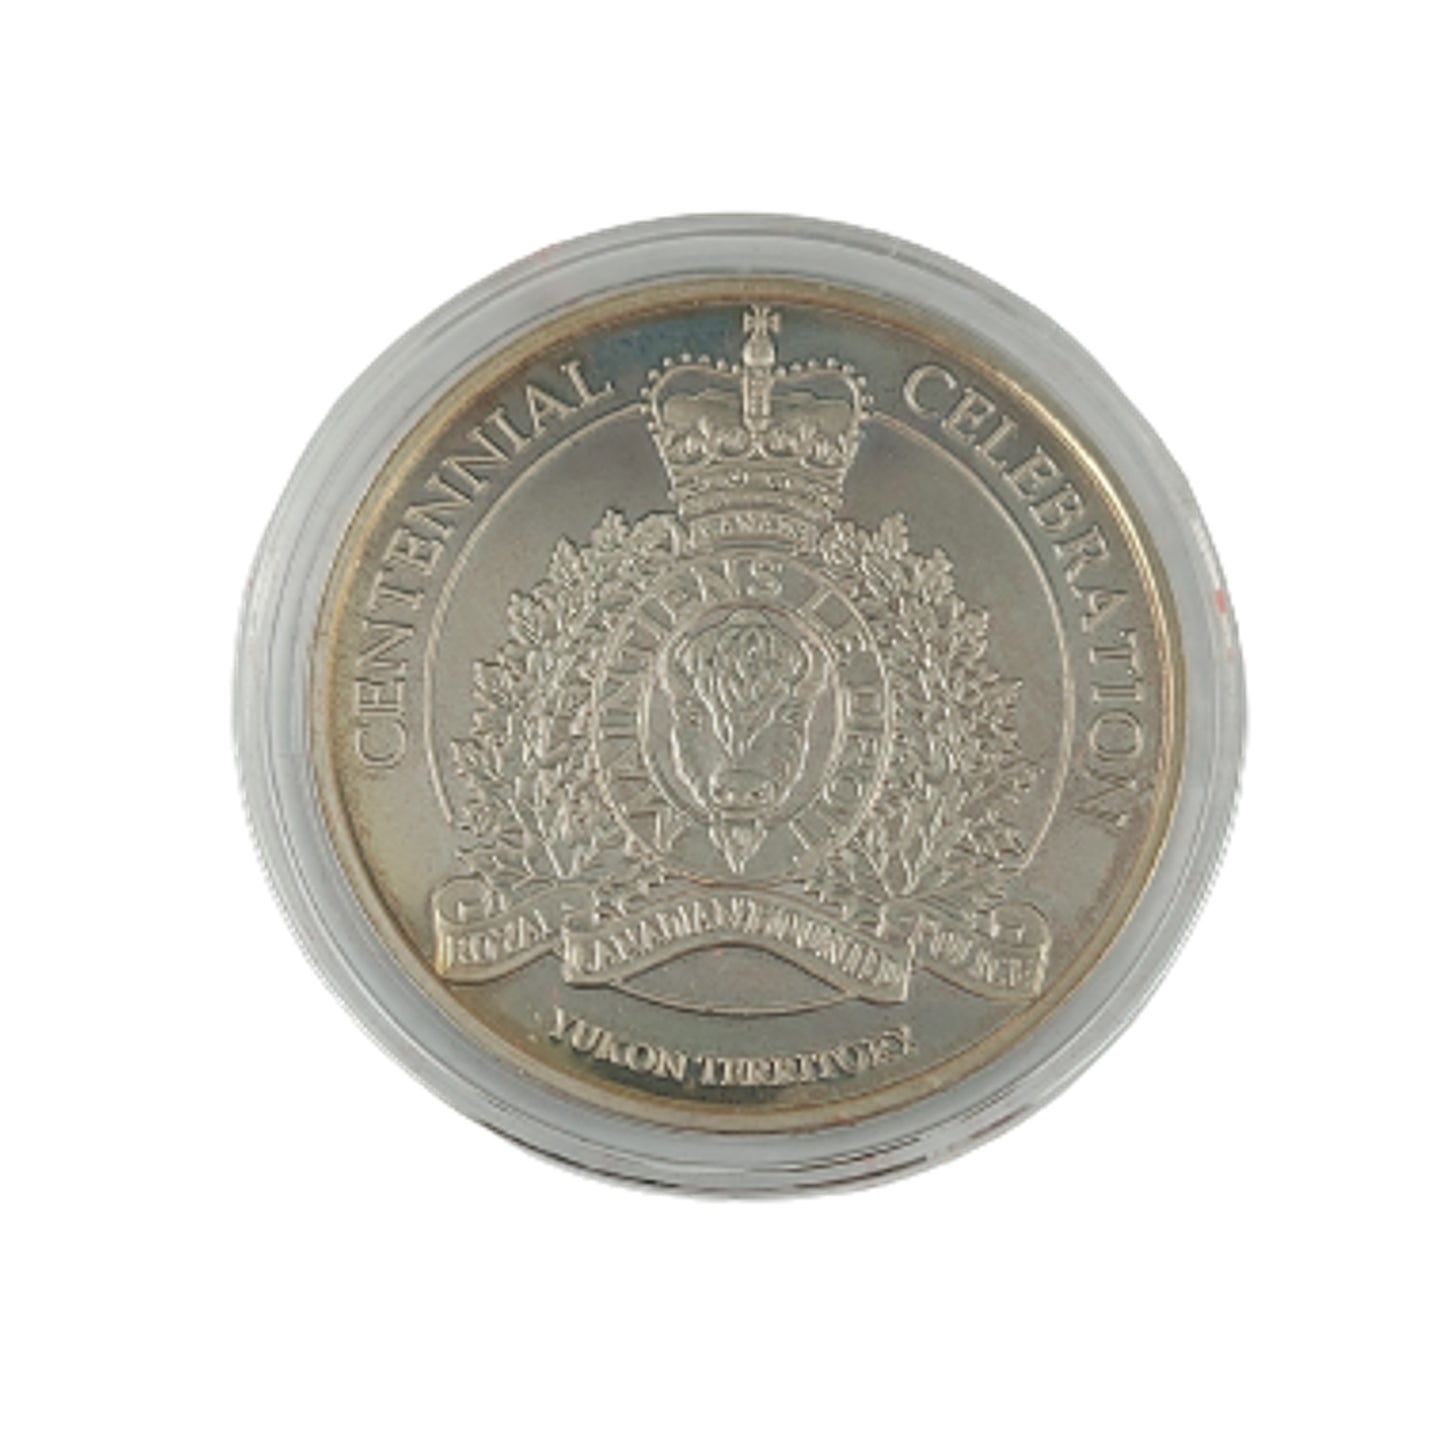 Cased RCMP Royal Canadian Mounted Police 100th Anniversary Yukon Territory Coin